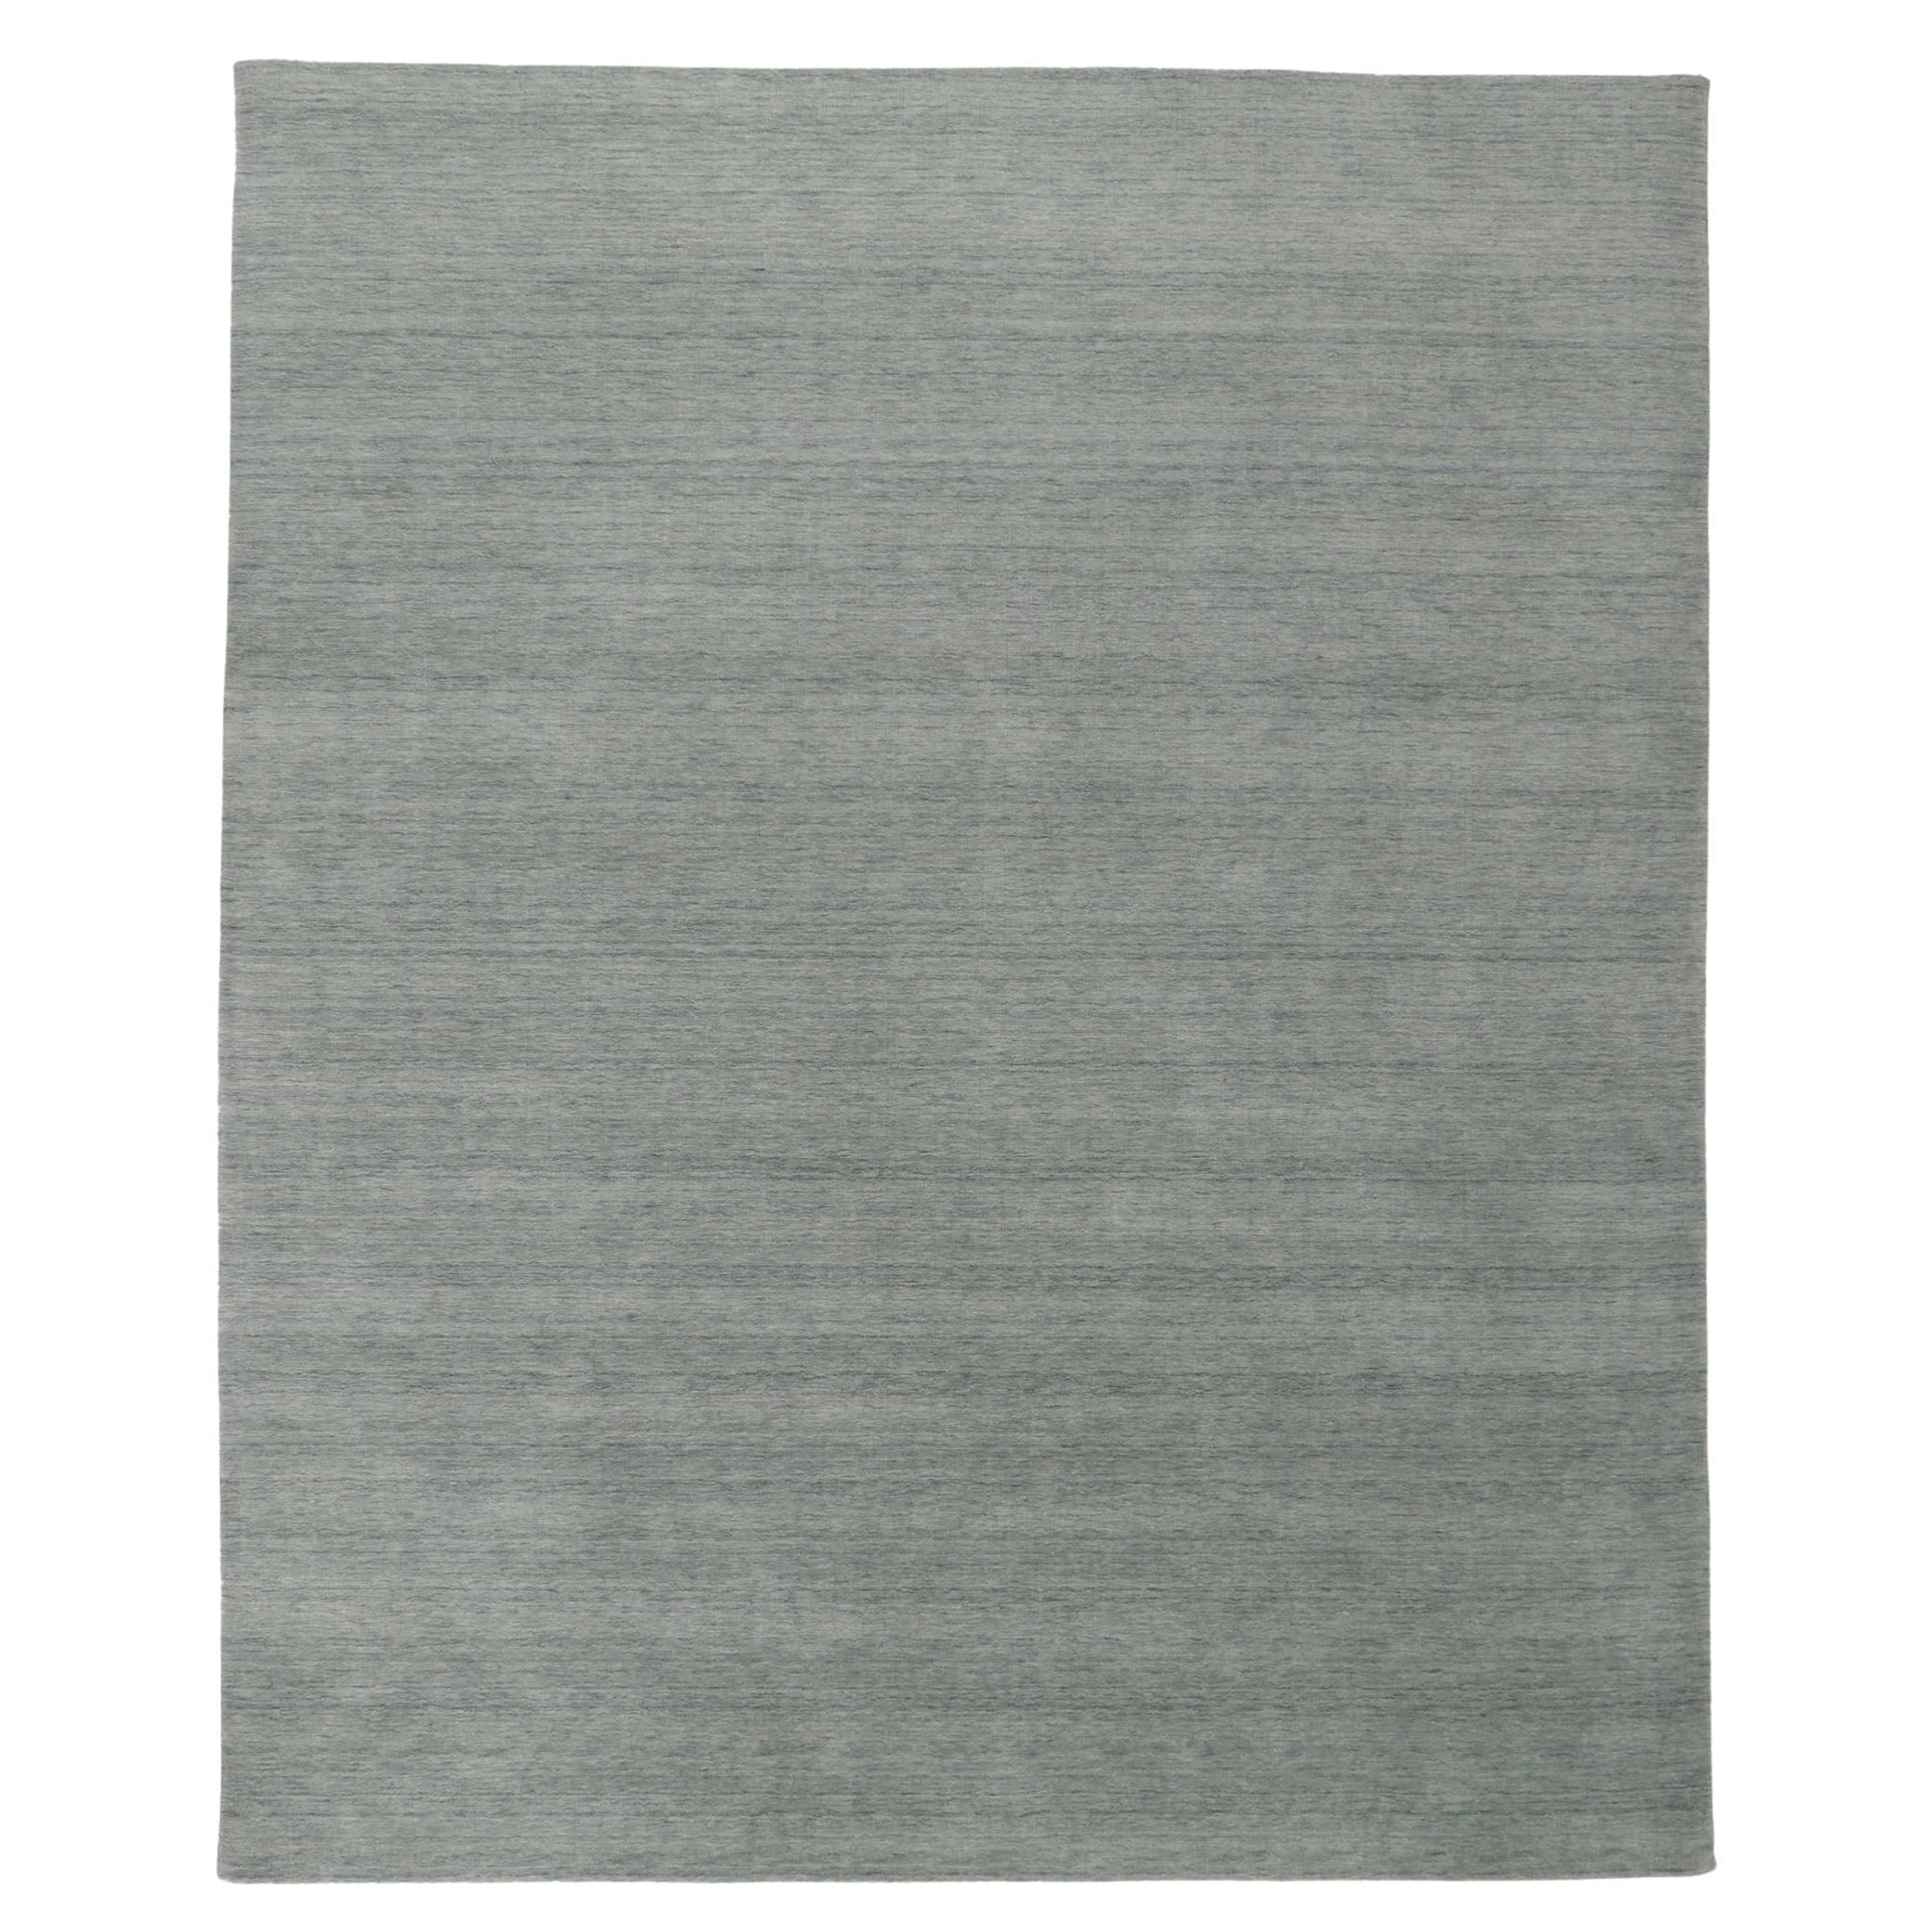 New Contemporary Grey Area Rug with Modern Style